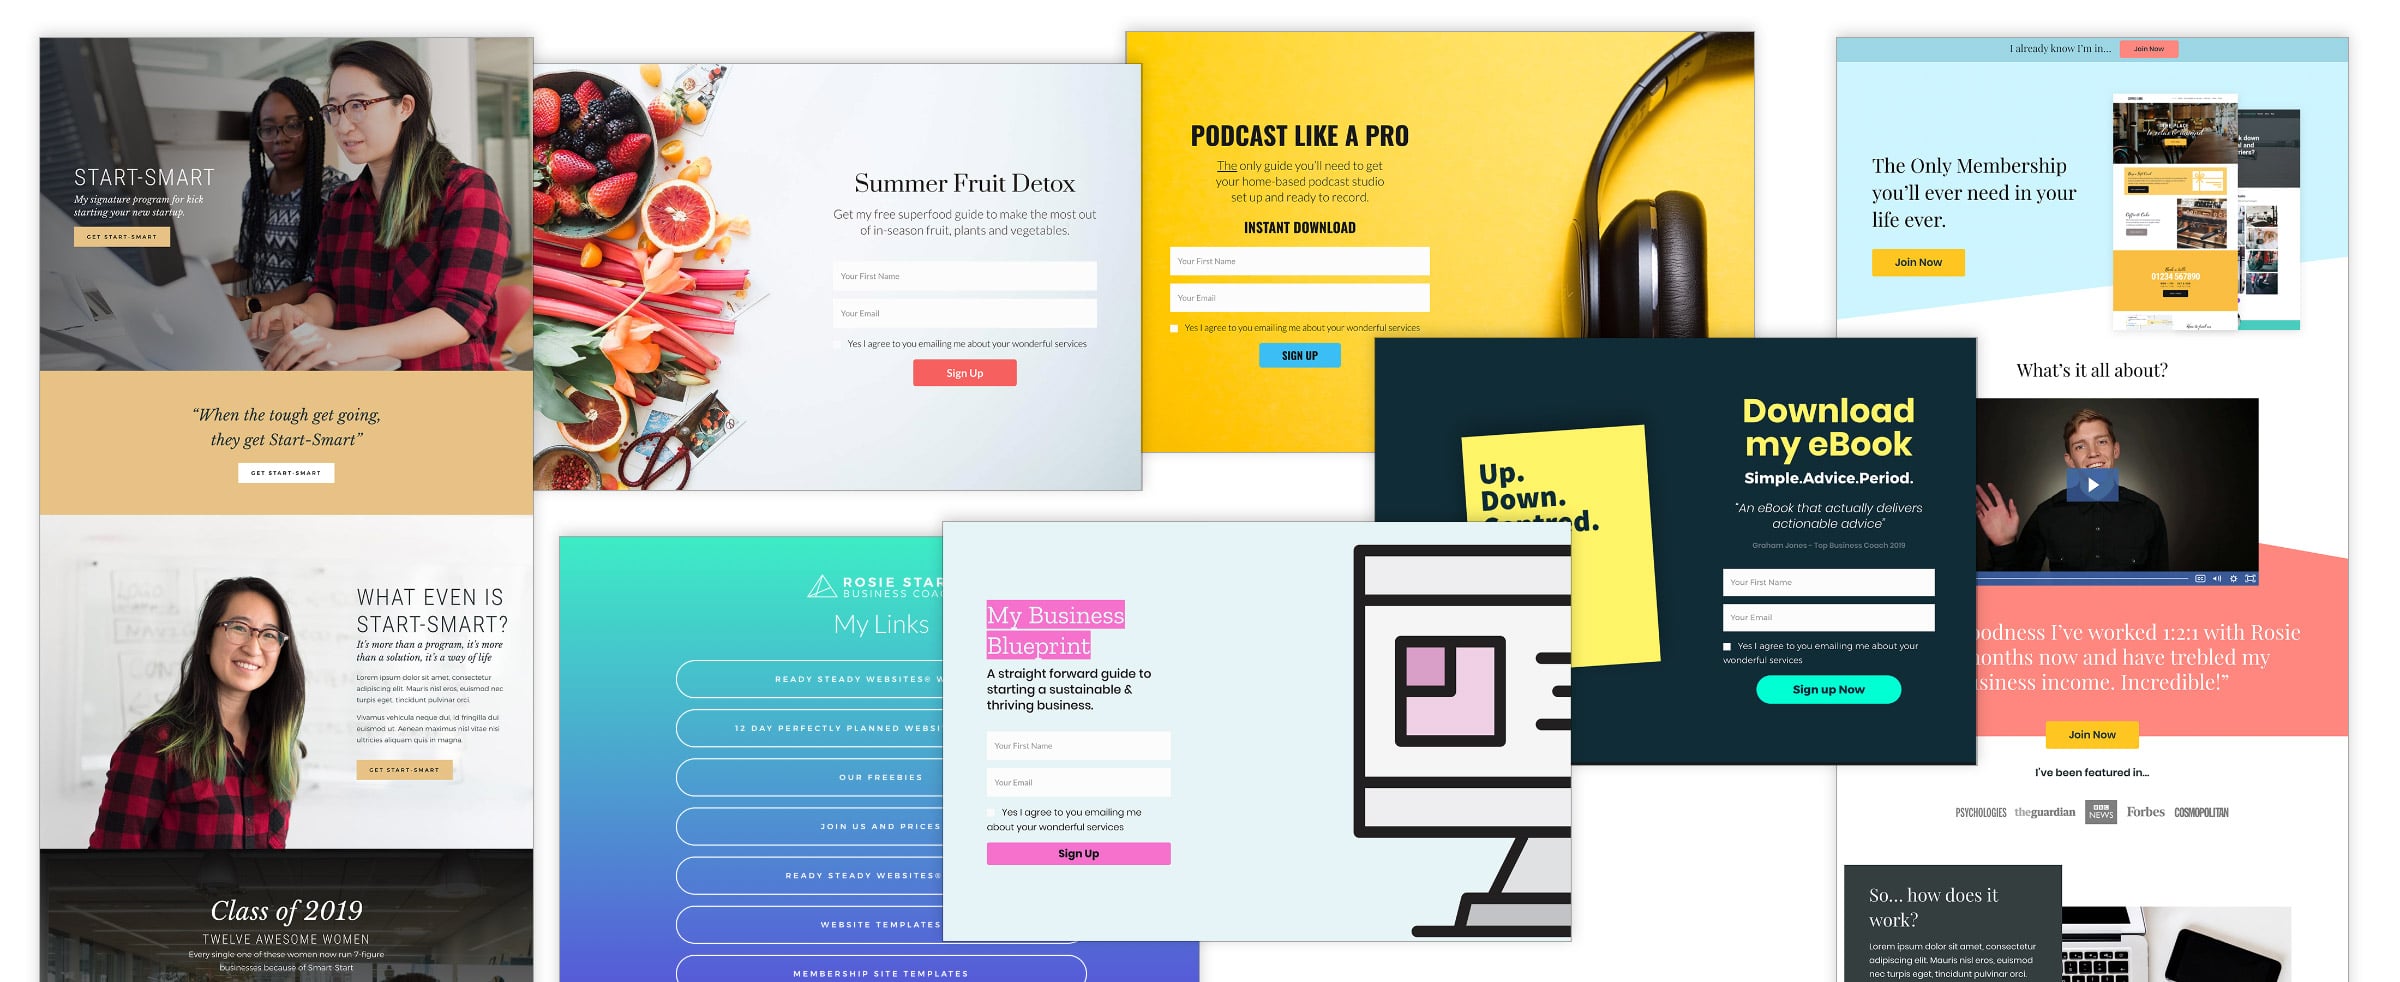 examples of landing pages that generate leads through a website